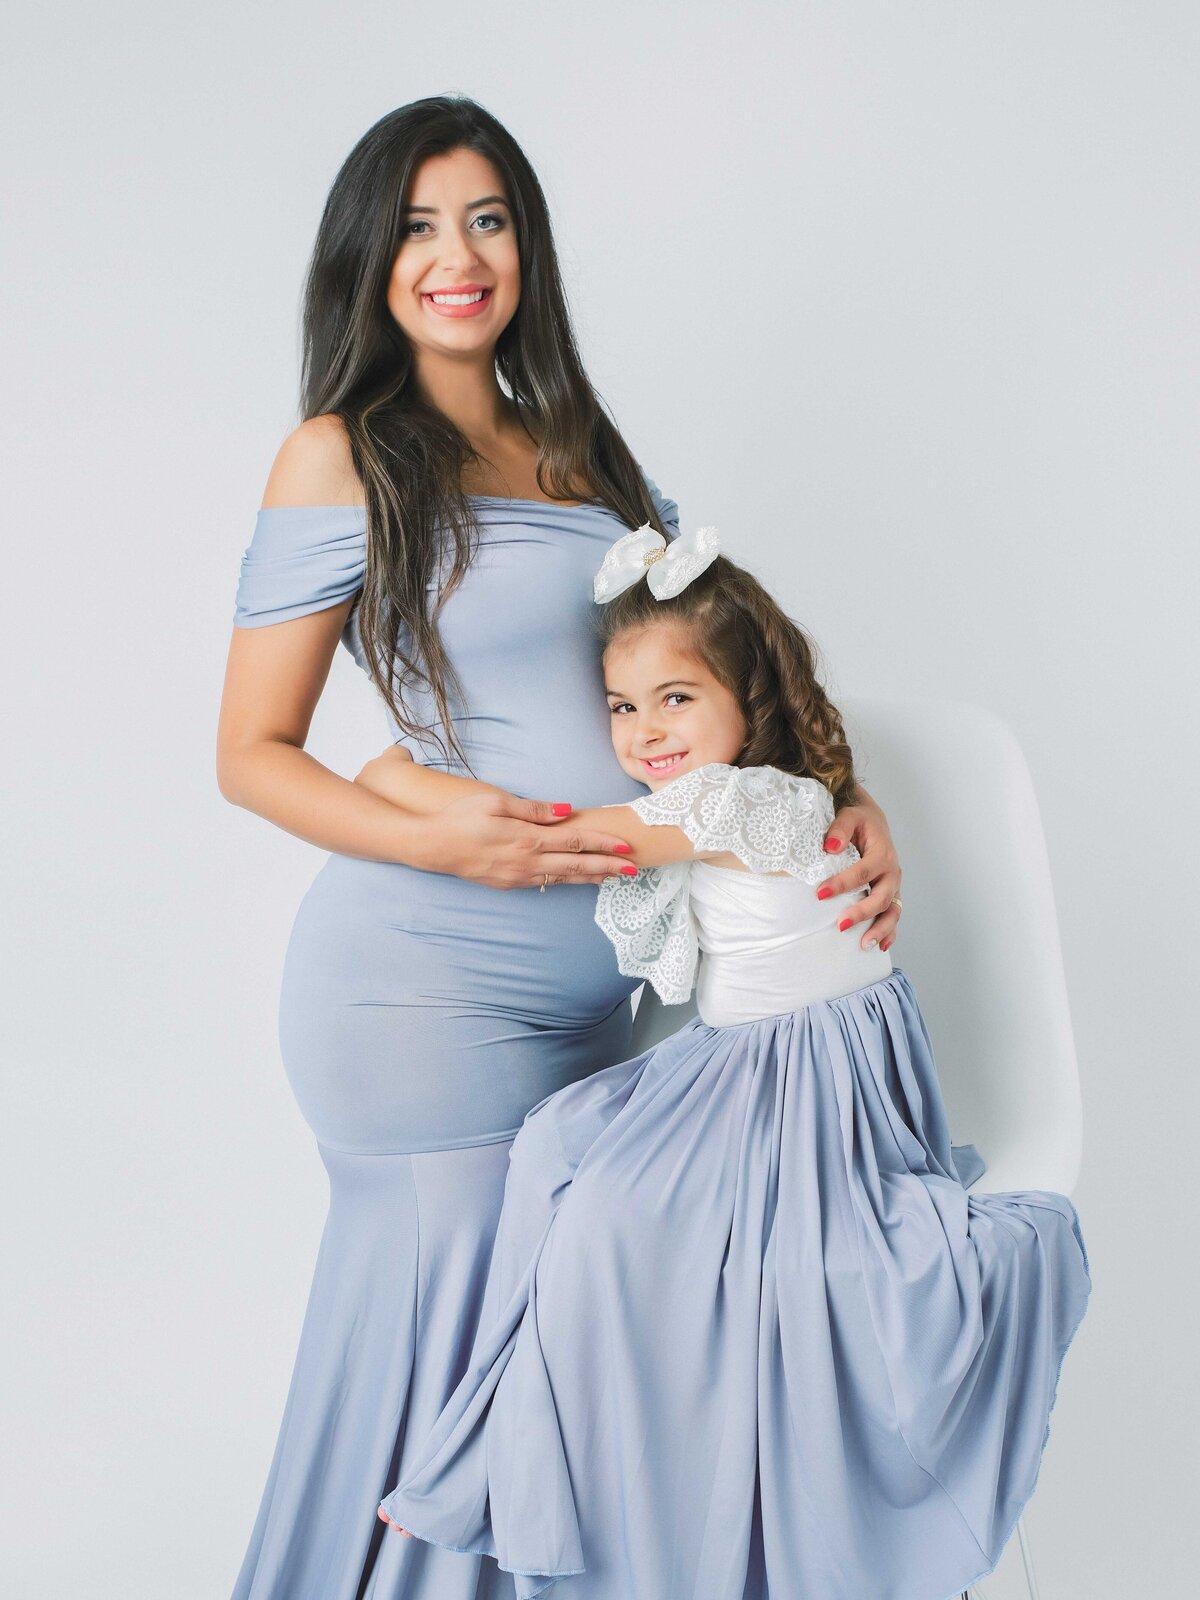 San-Diego-Fine-Art-Maternity-Photographer-Babsie-Baby-Photography-Mommy-and-me-daughter-01